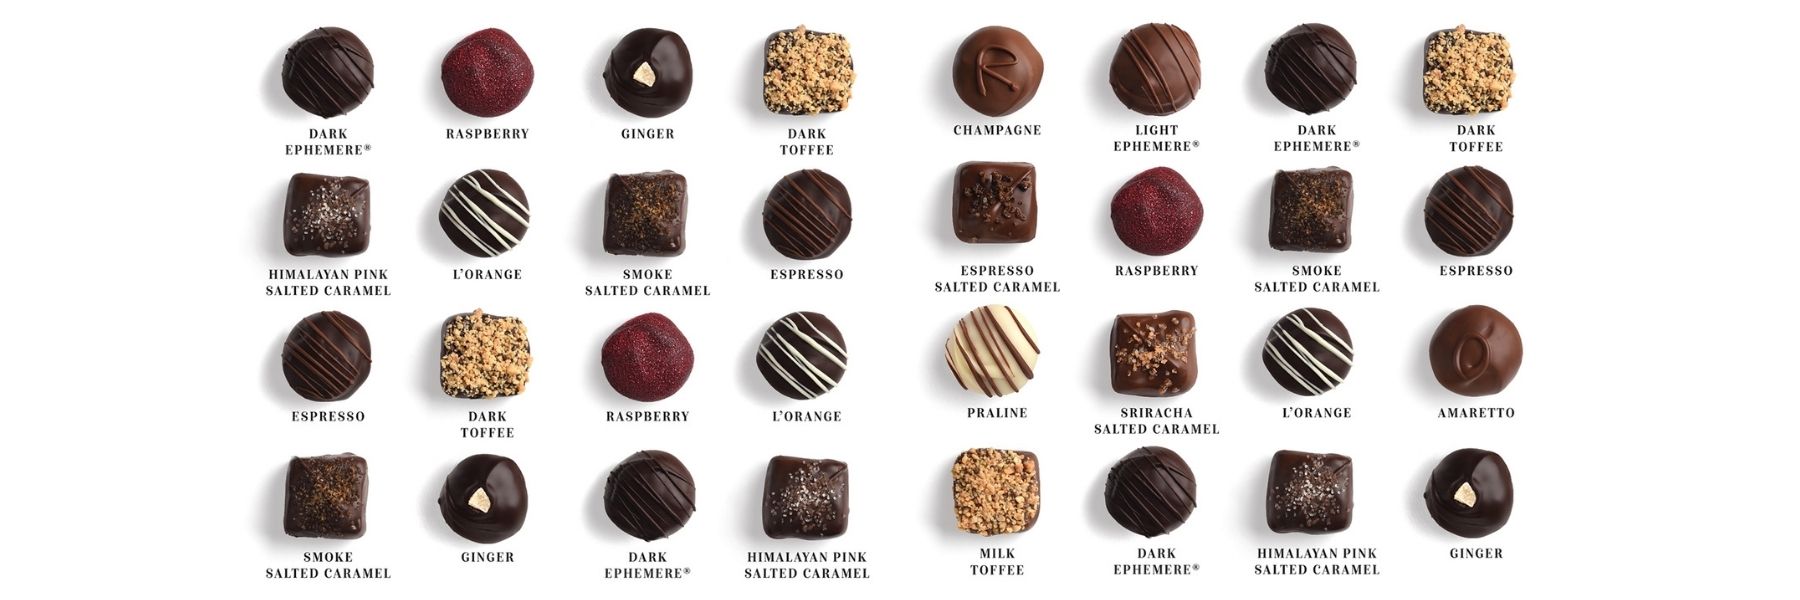 Dilettante Chocolates New Truffle Gift Boxes Blog Banner